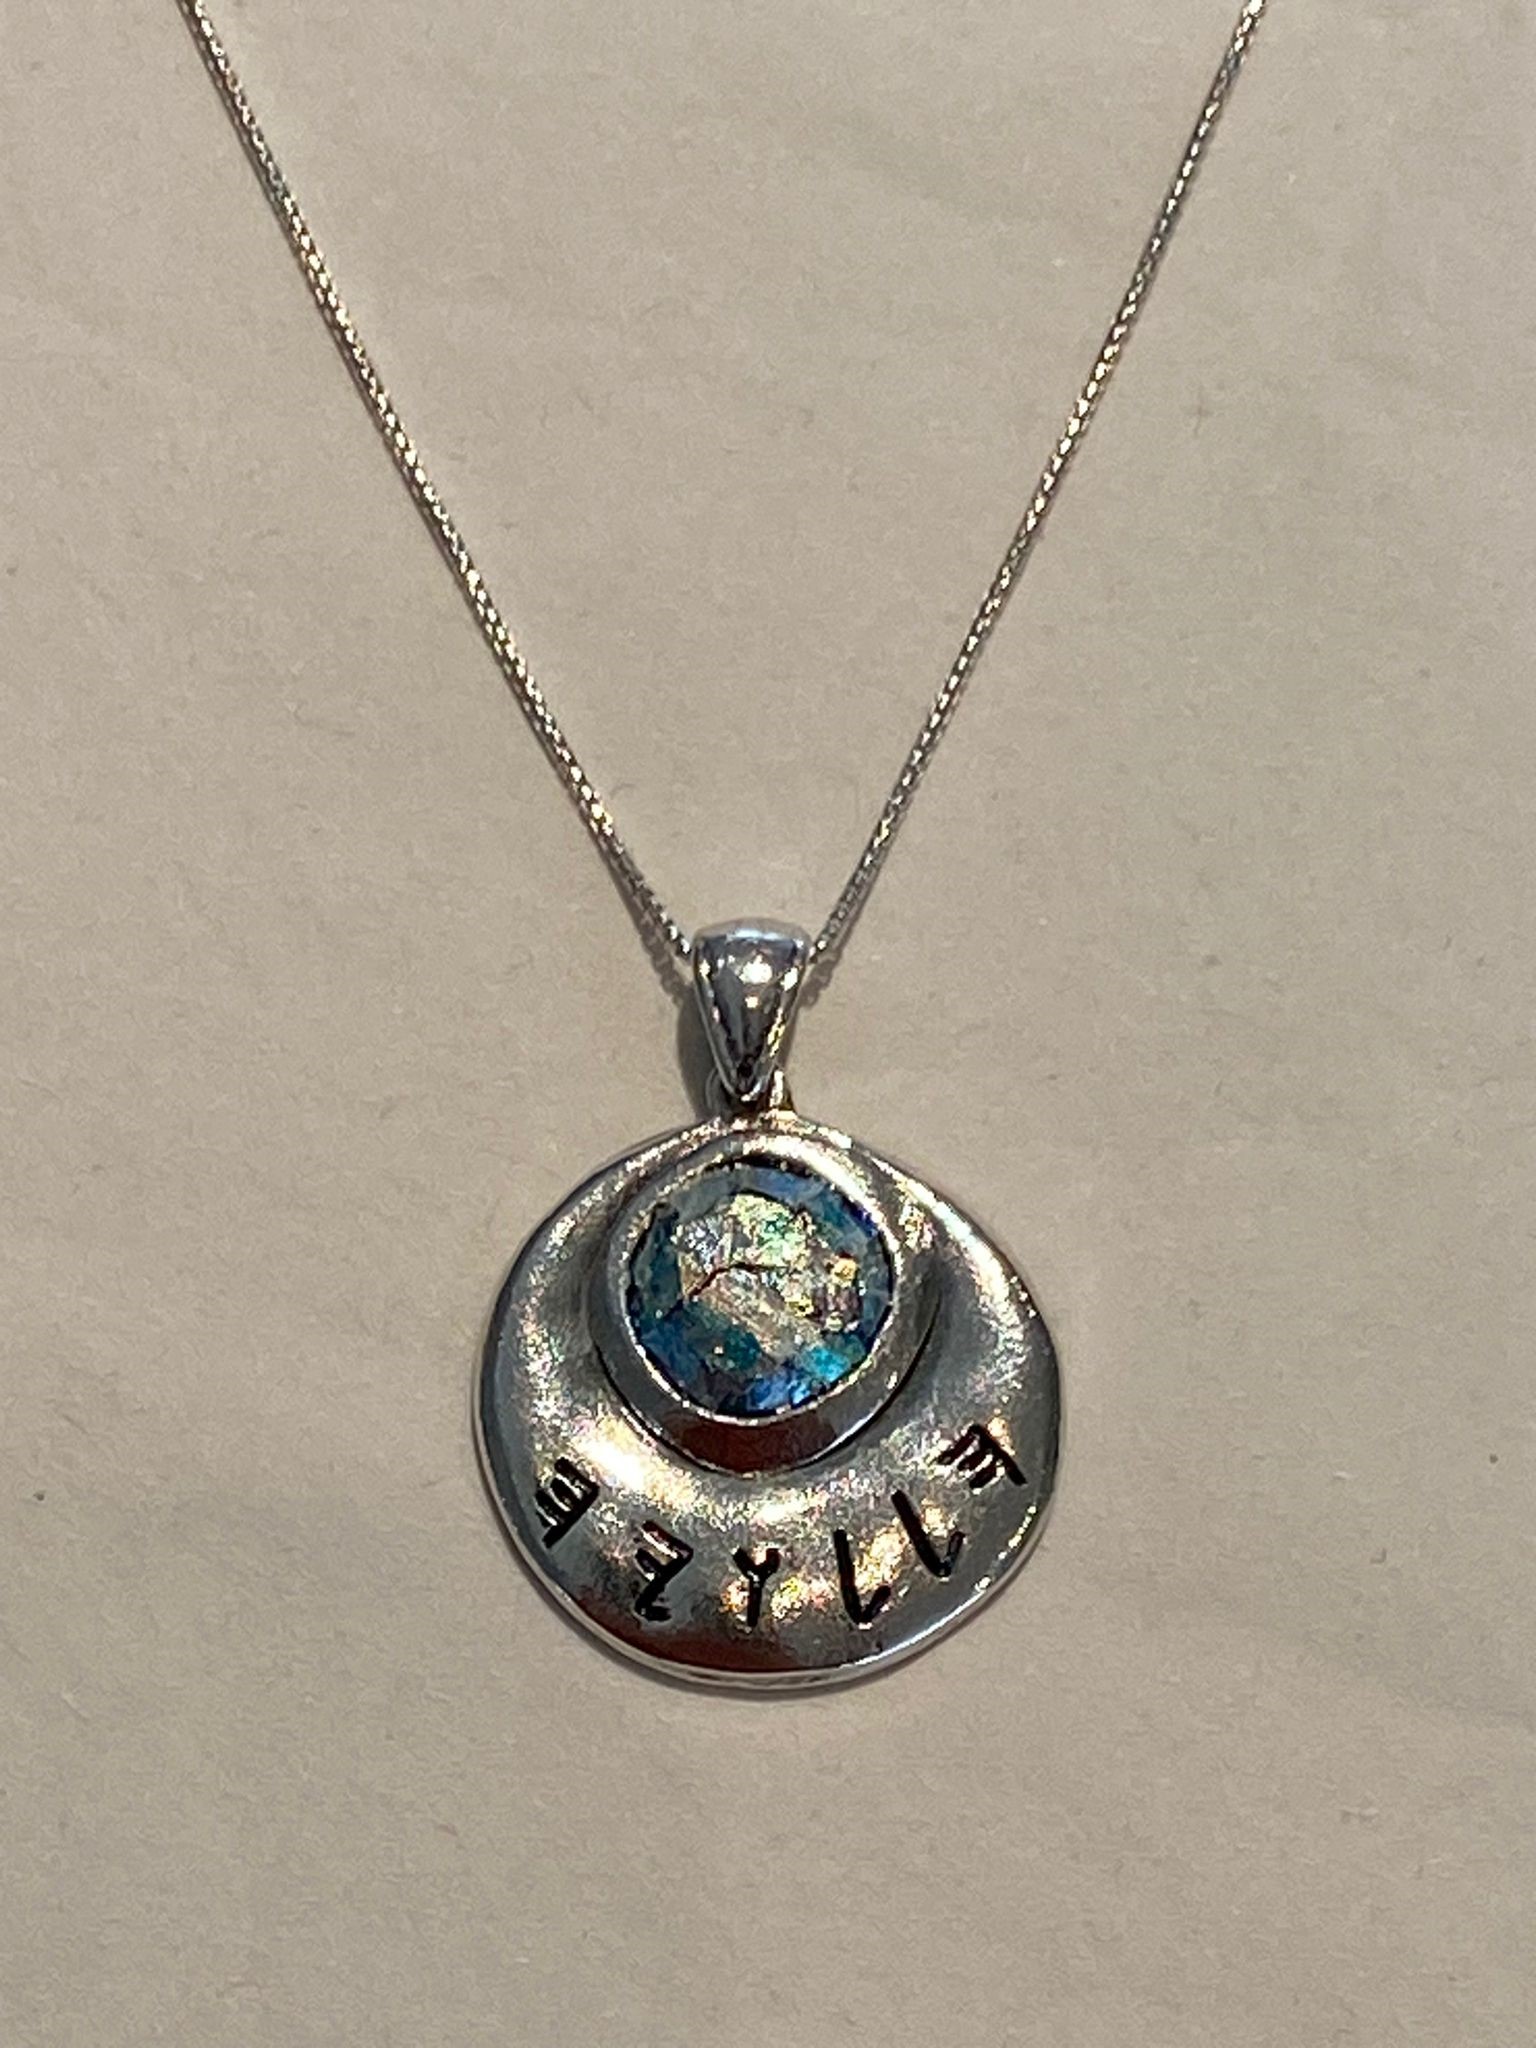 “Hallelujah” Roman Glass Pendant With Chain (silver)